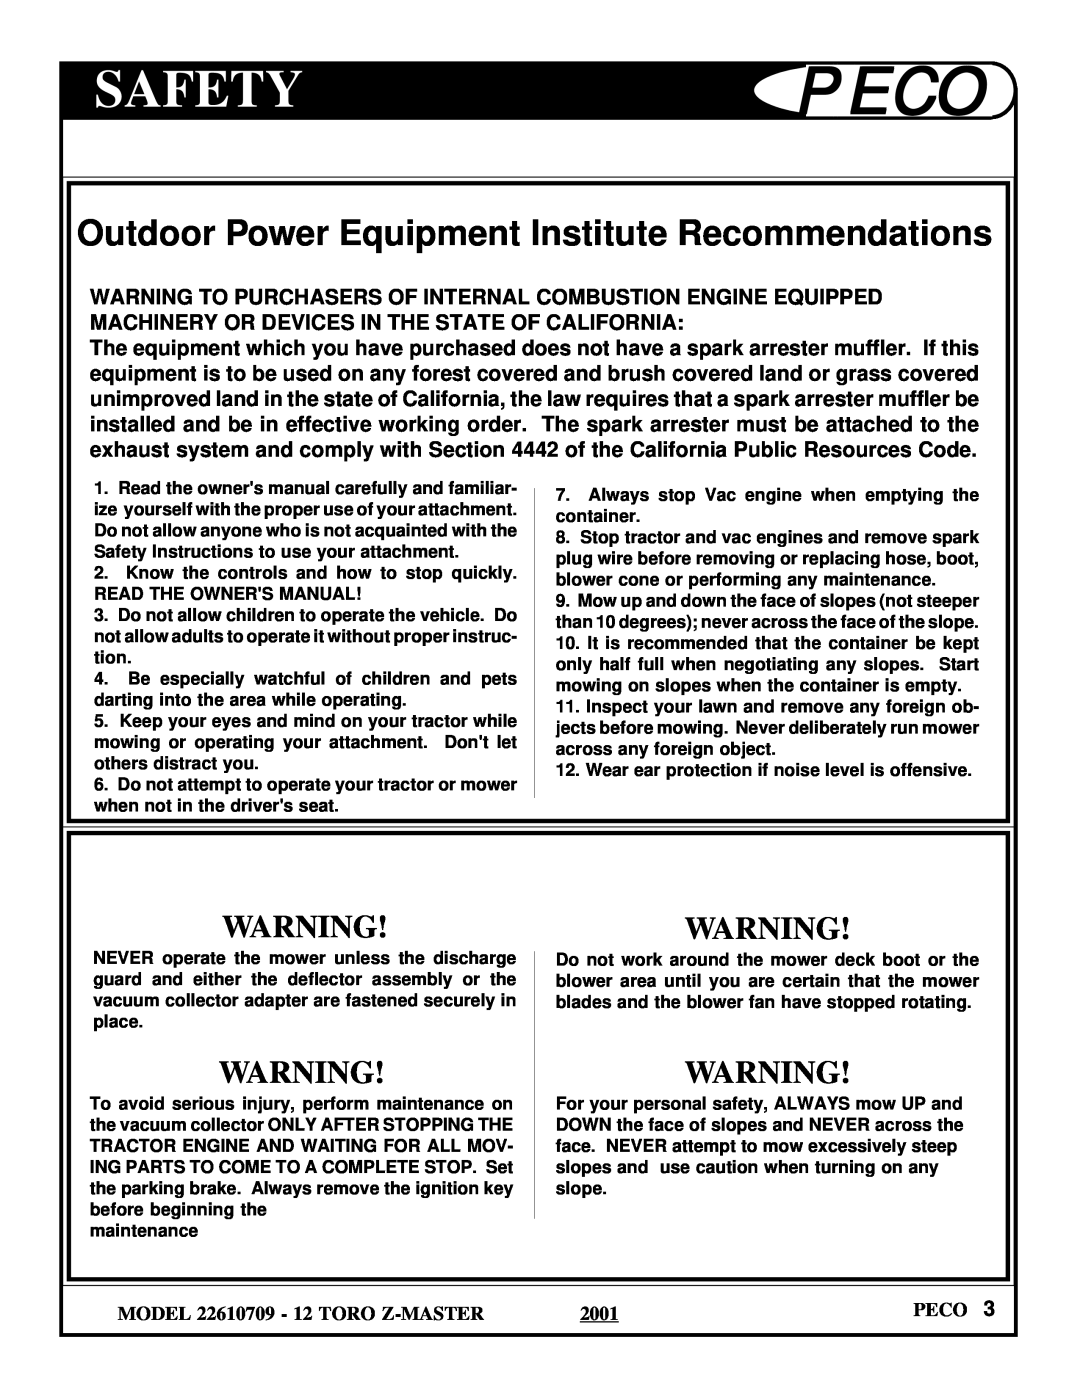 Toro 22610709, 22610712 owner manual Safetypeco, Outdoor Power Equipment Institute Recommendations 